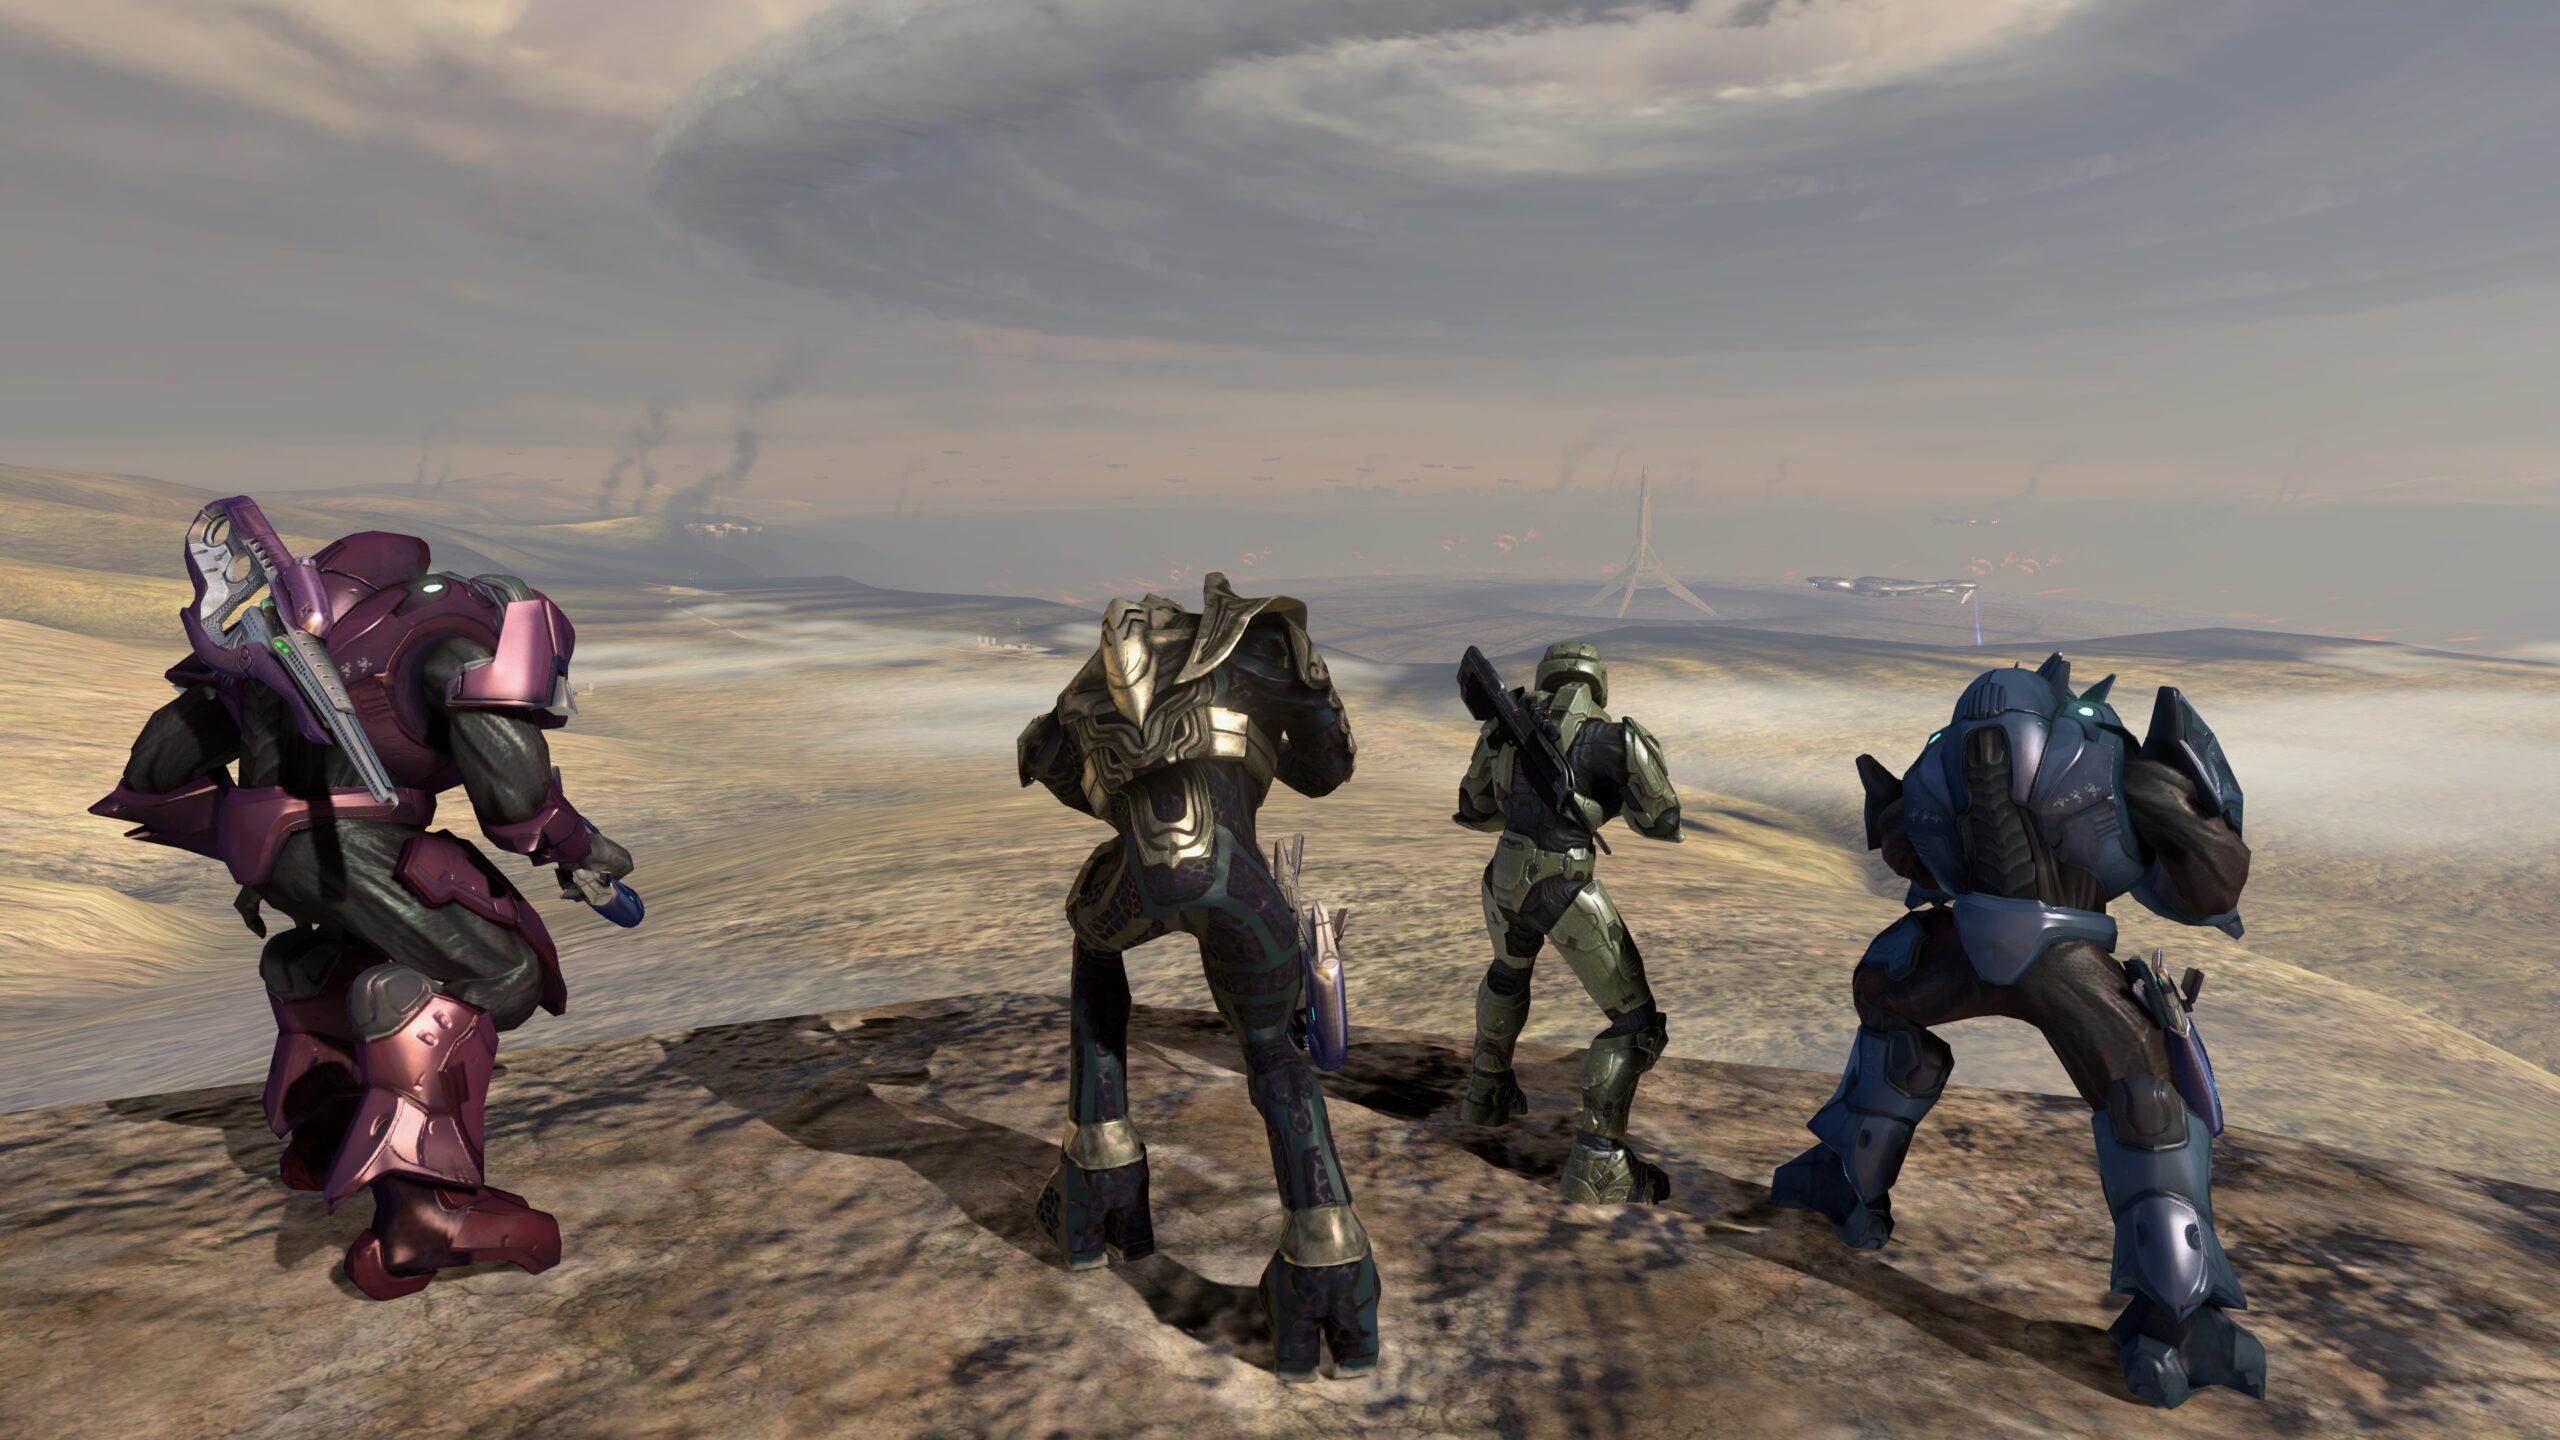 Halo 3 screenshot of (from left-to-right) Usze 'Taham, Arbiter Thel 'Vadam, the Master Chief, and N'tho 'Sraom looking out at the storm gathered around the Forerunner keyship on the mission Tsavo Highway